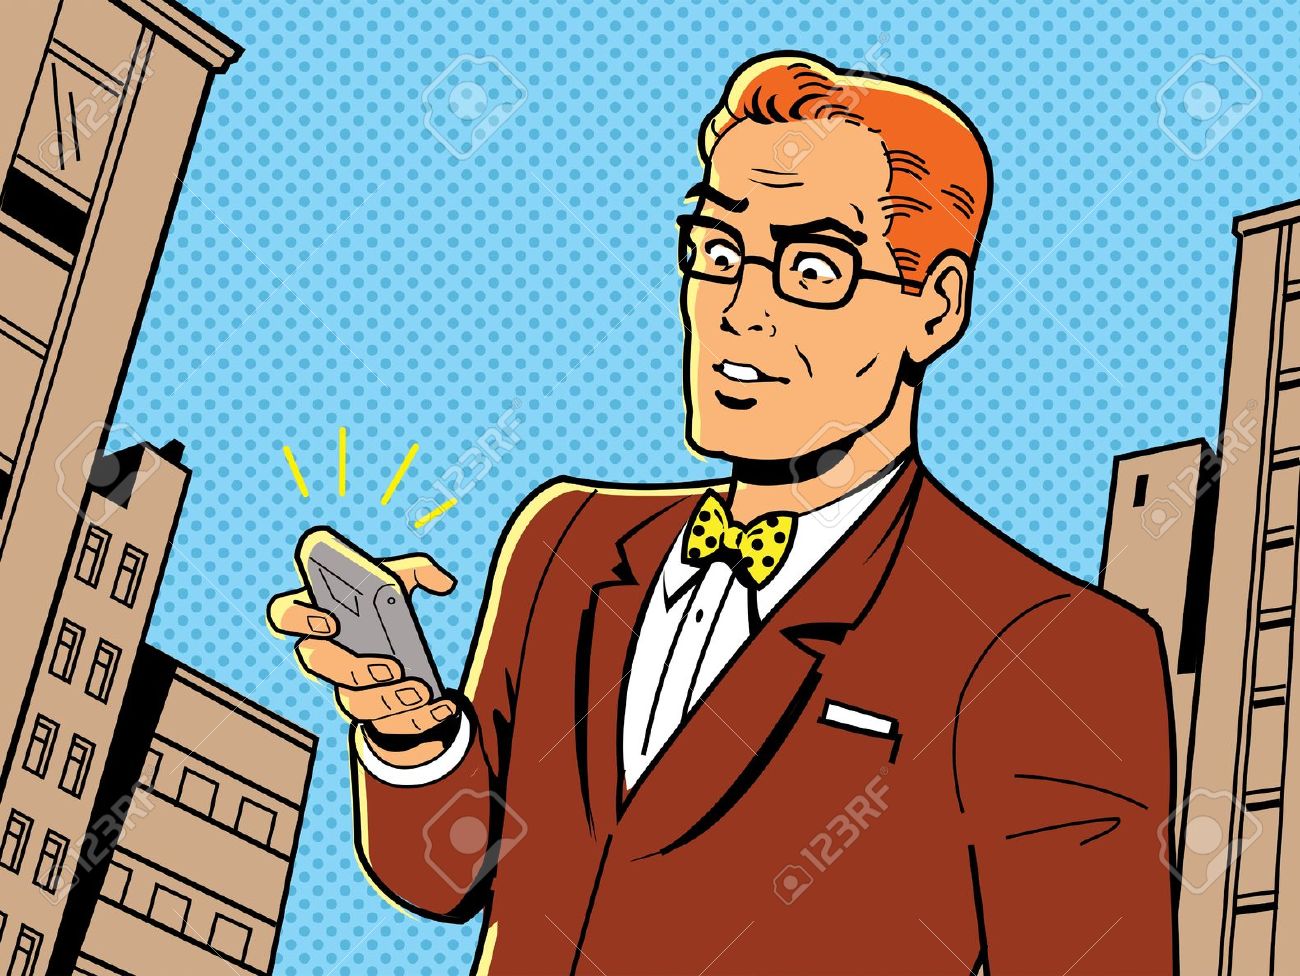 Ironic Illustration Of A Retro 1940s Or 1950s Man With Glasses.